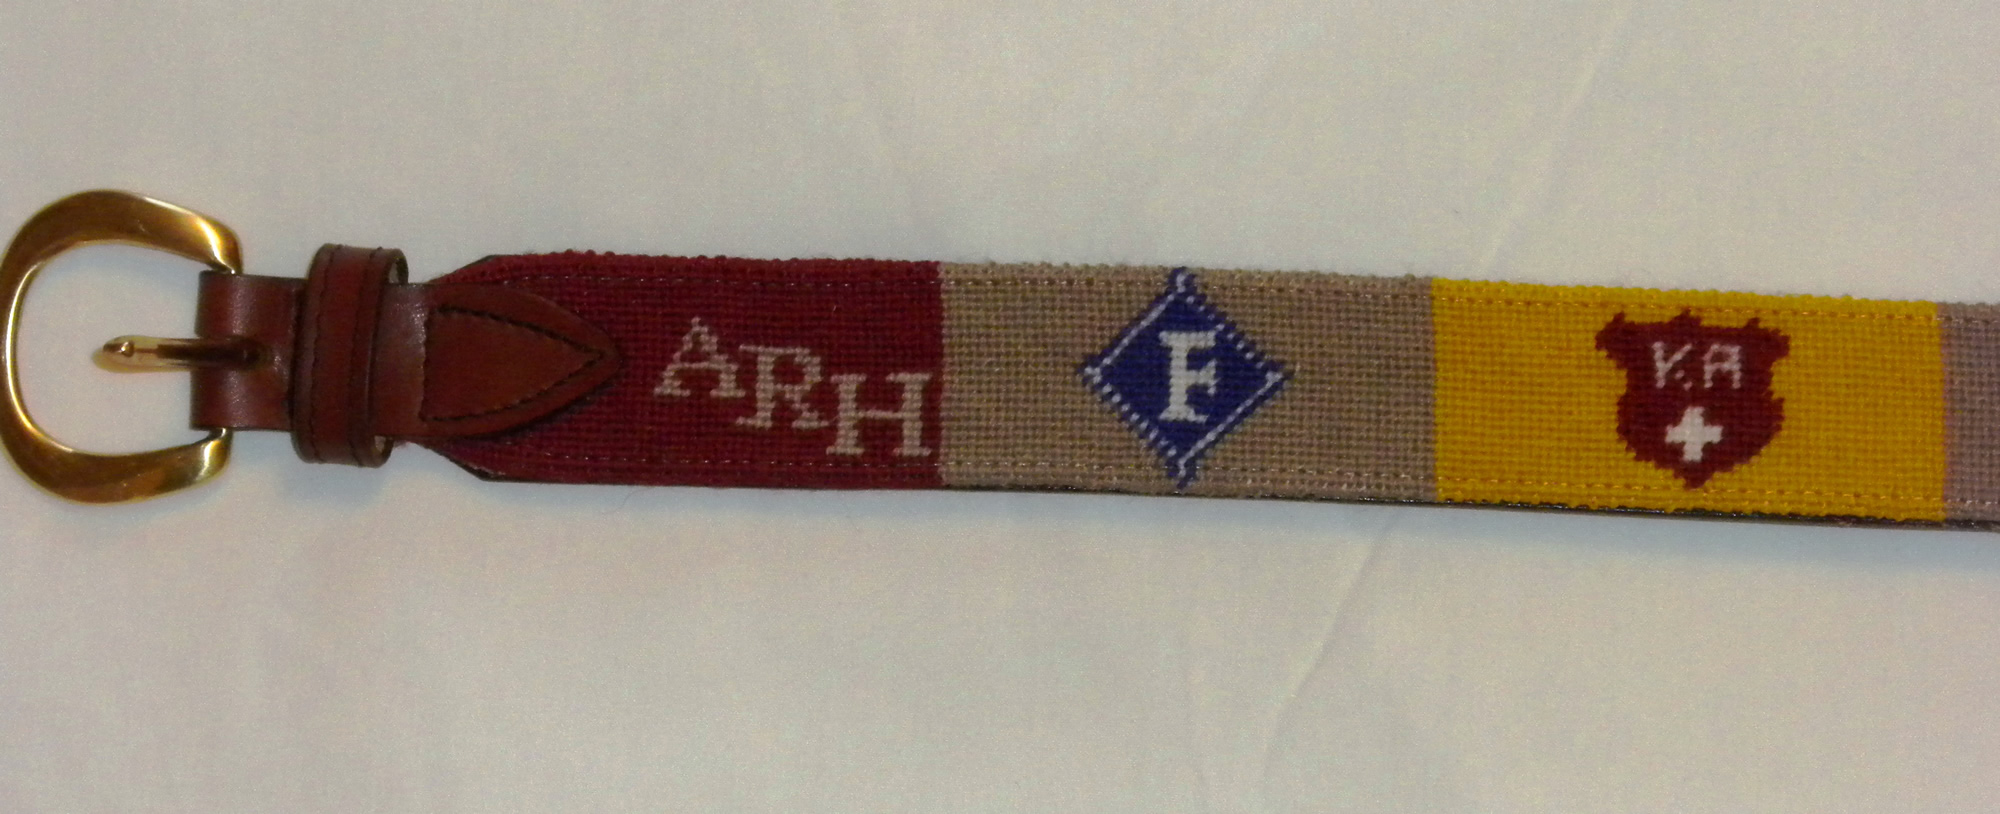 Custom Needlepoint Belt #2 stitched by Traci in New Mexico